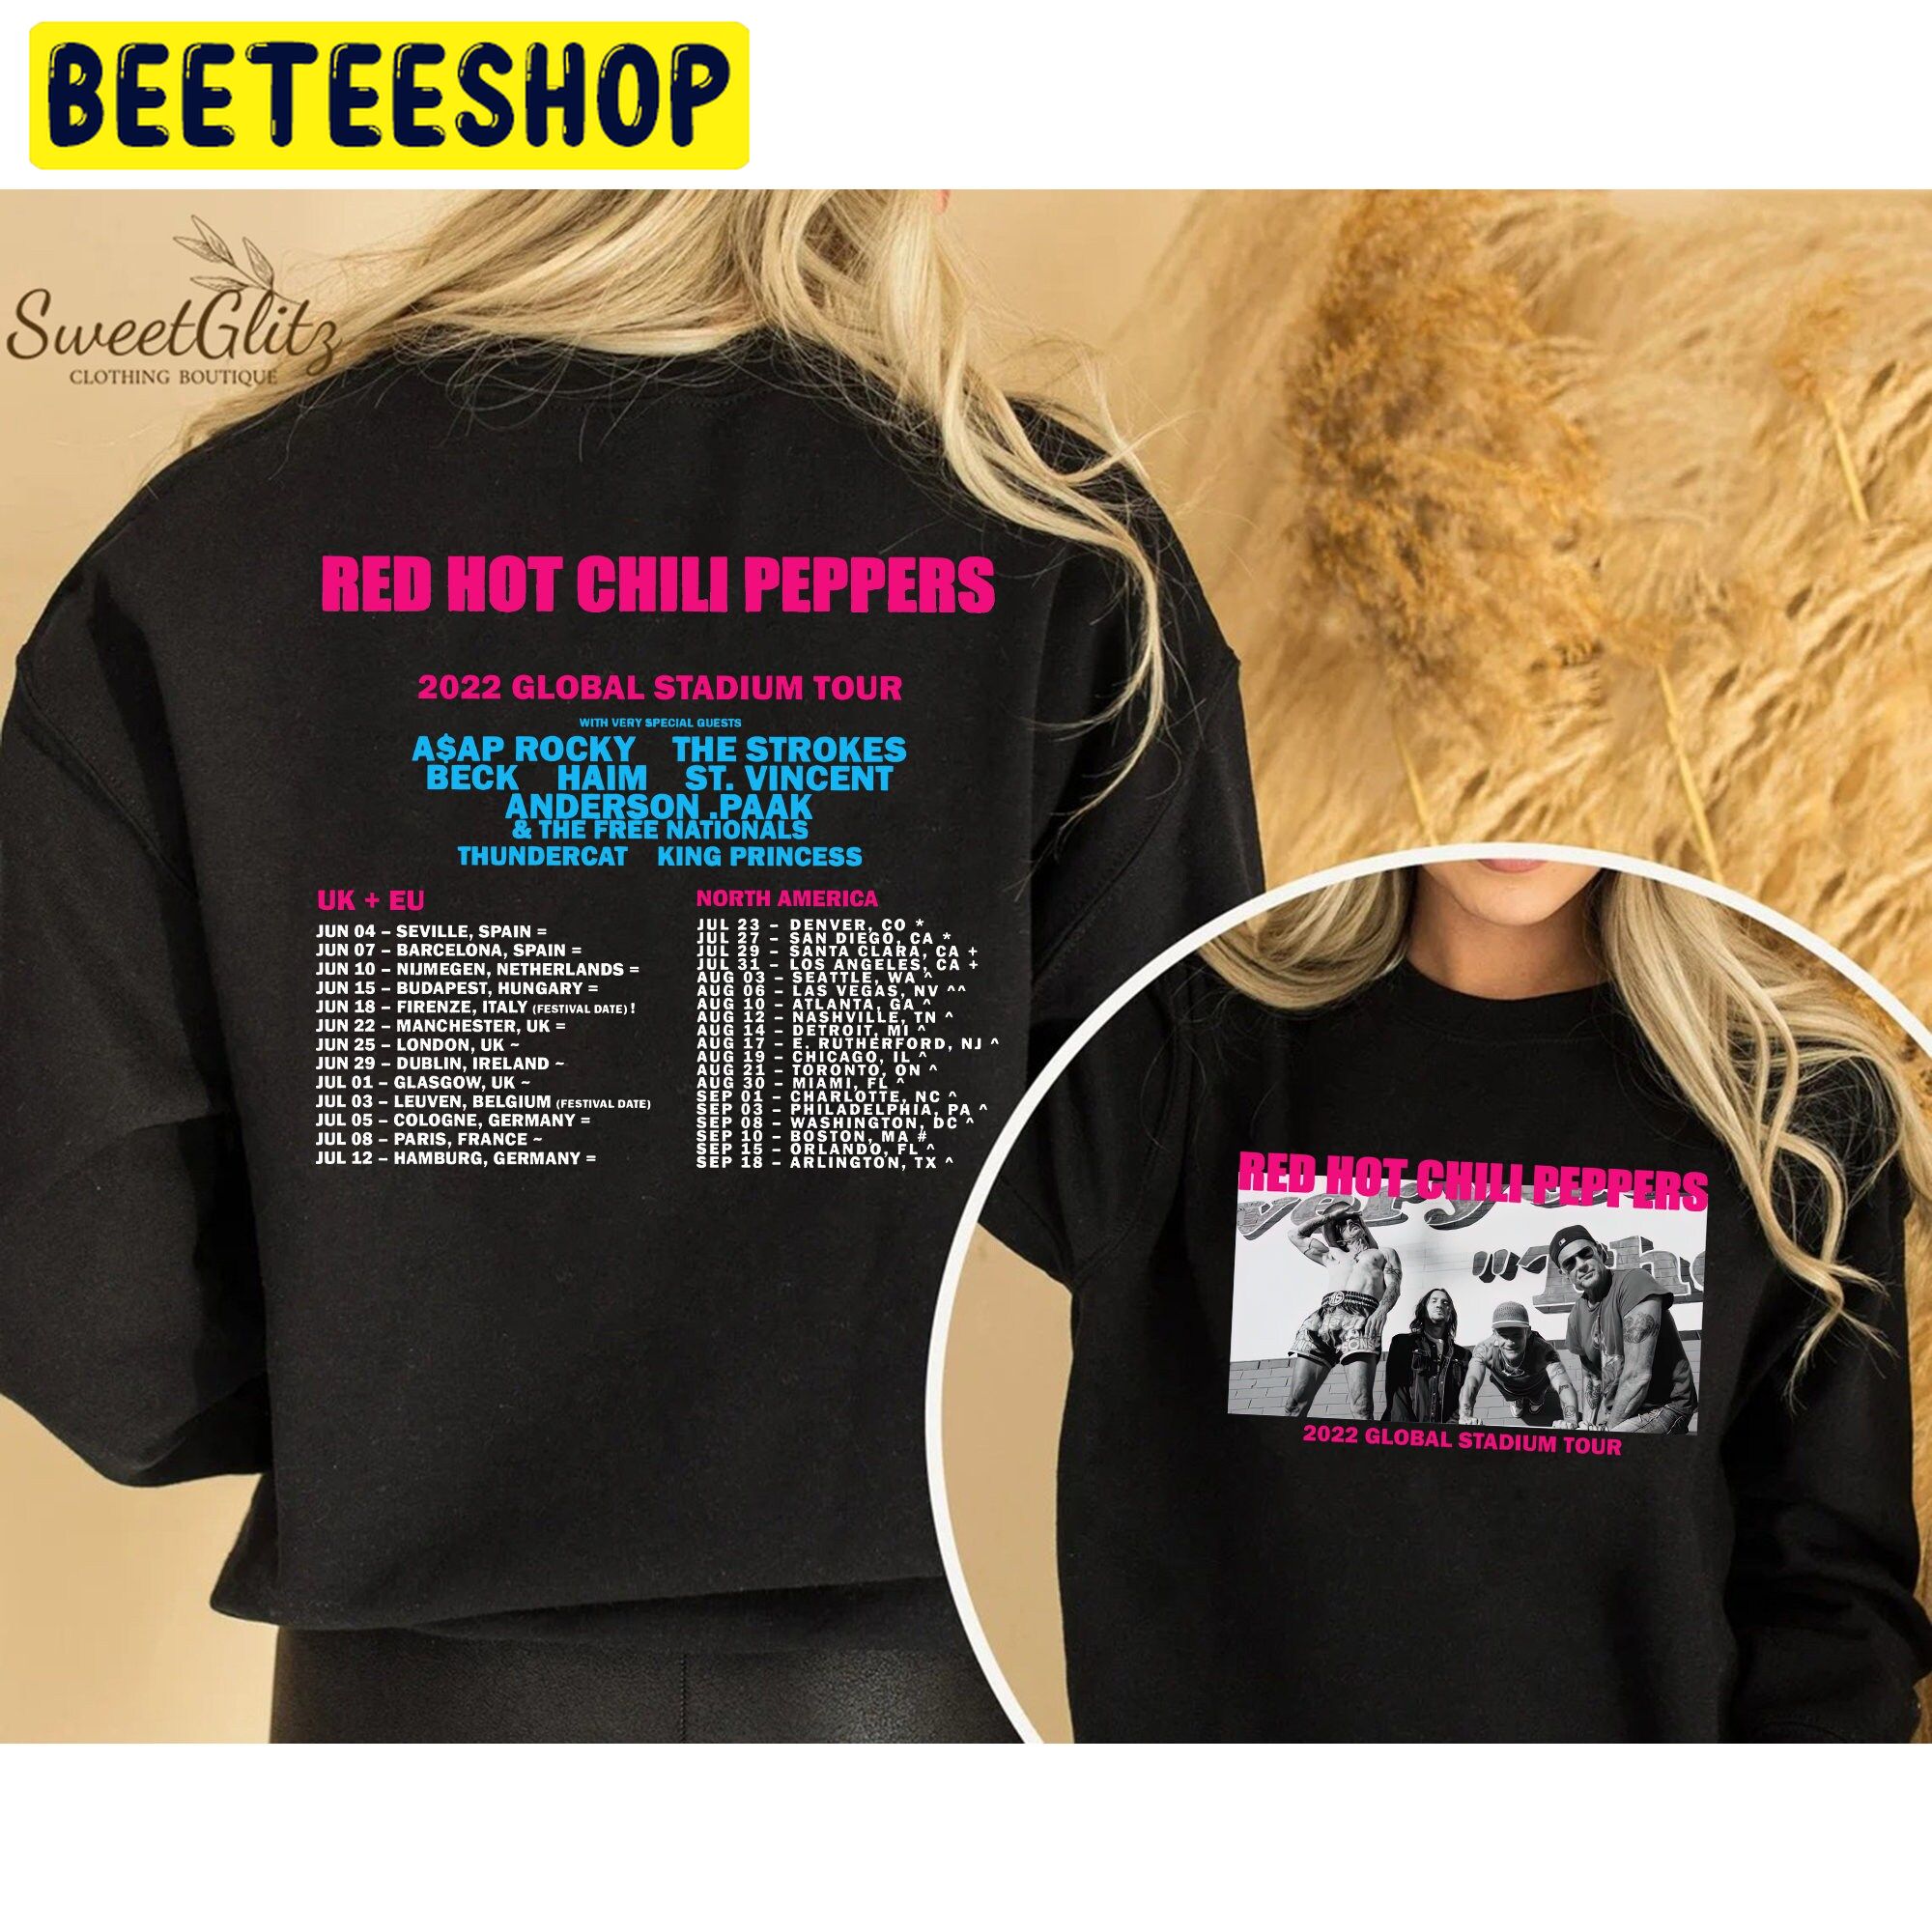 Red Hot Chili Peppers 2022 Global Stadium Tour Asap Rocky The Strokes Beck Haim St.Vincent Anderson Paak And The Free Nationals Thundercat King Princess Double Side Unisex Sweatshirt